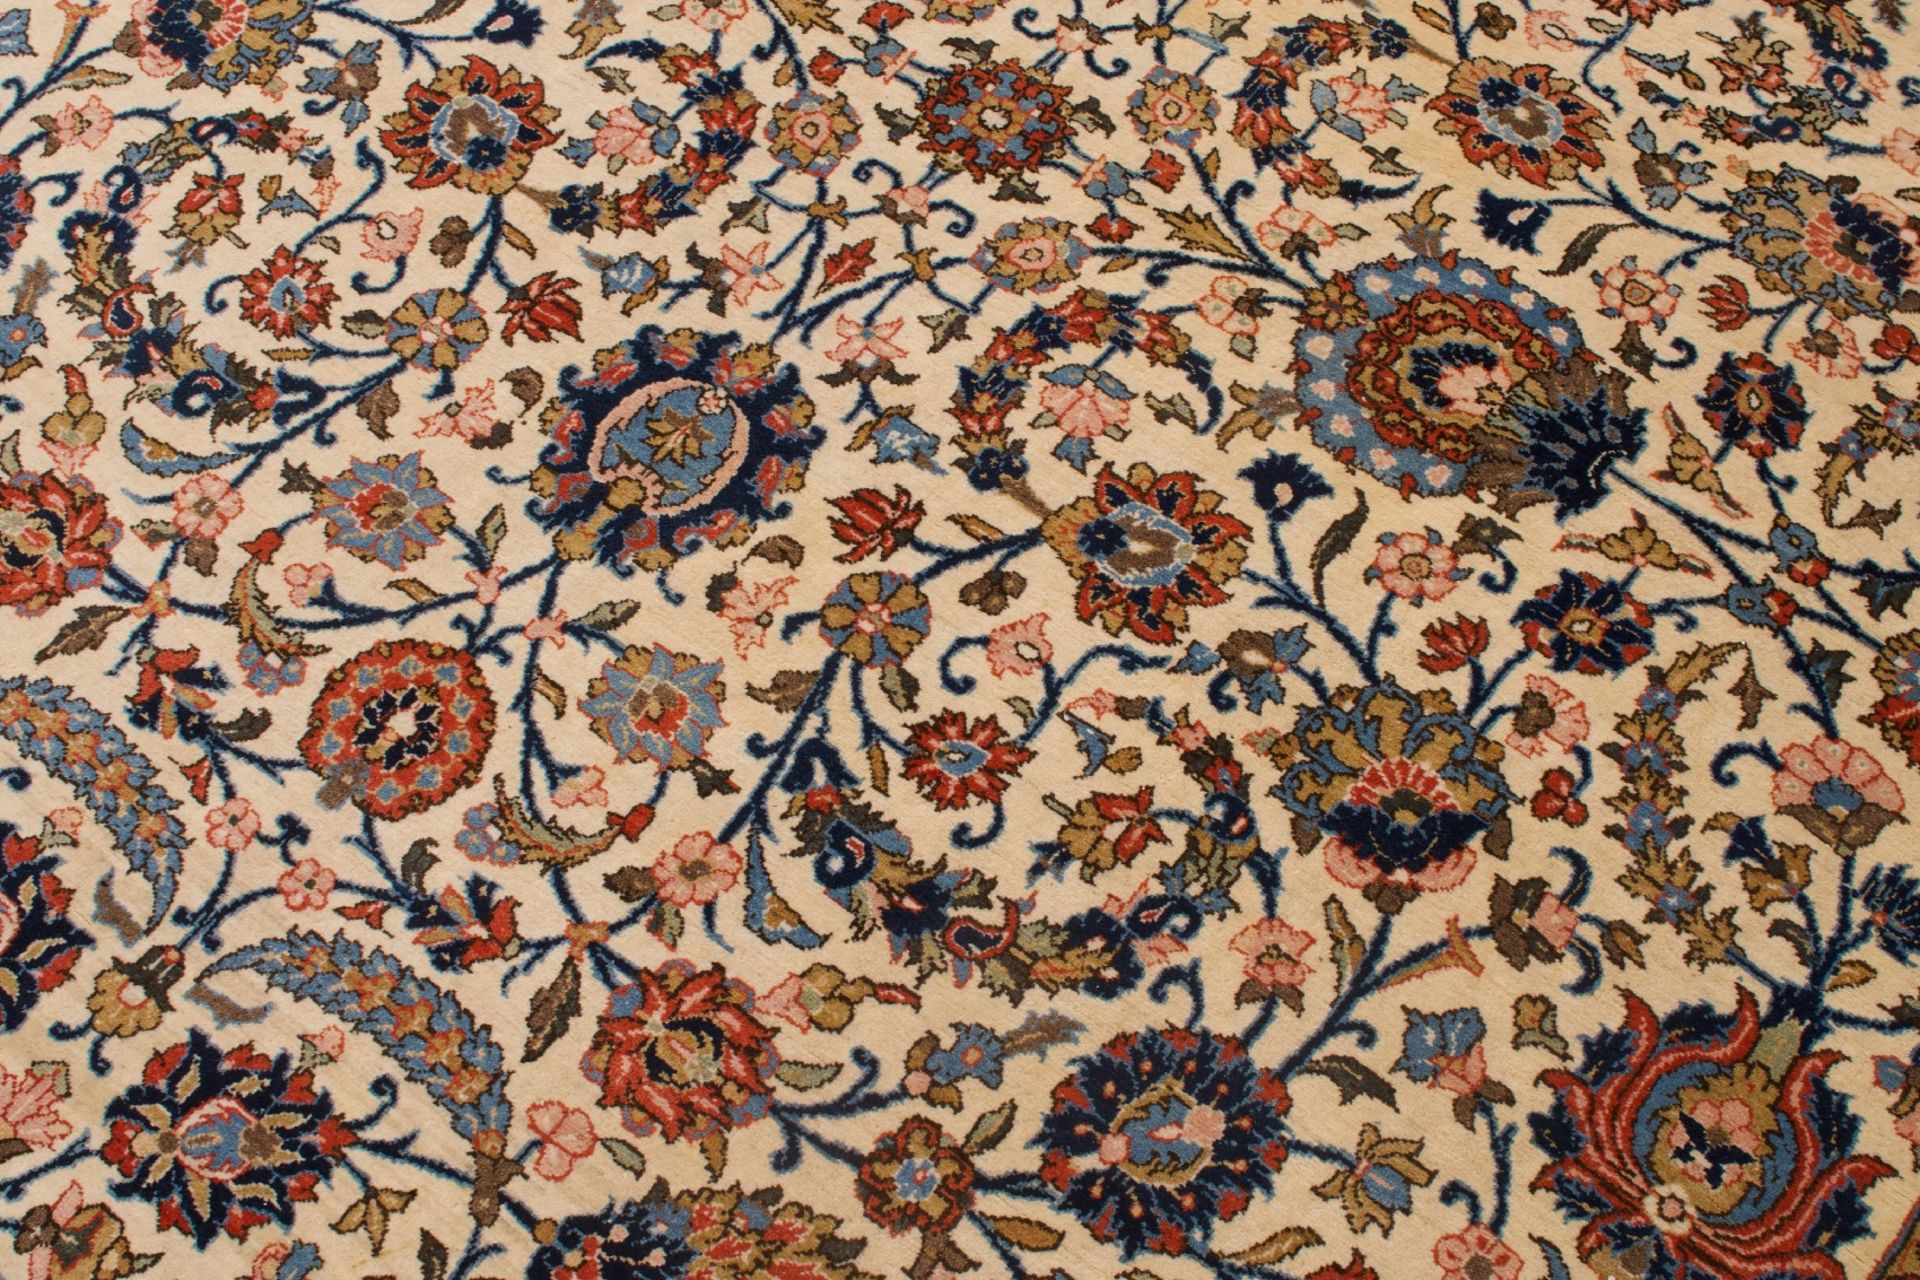 Grosser Isfahan Woll-Teppich | Large Isfahan wool carpet - Image 2 of 5